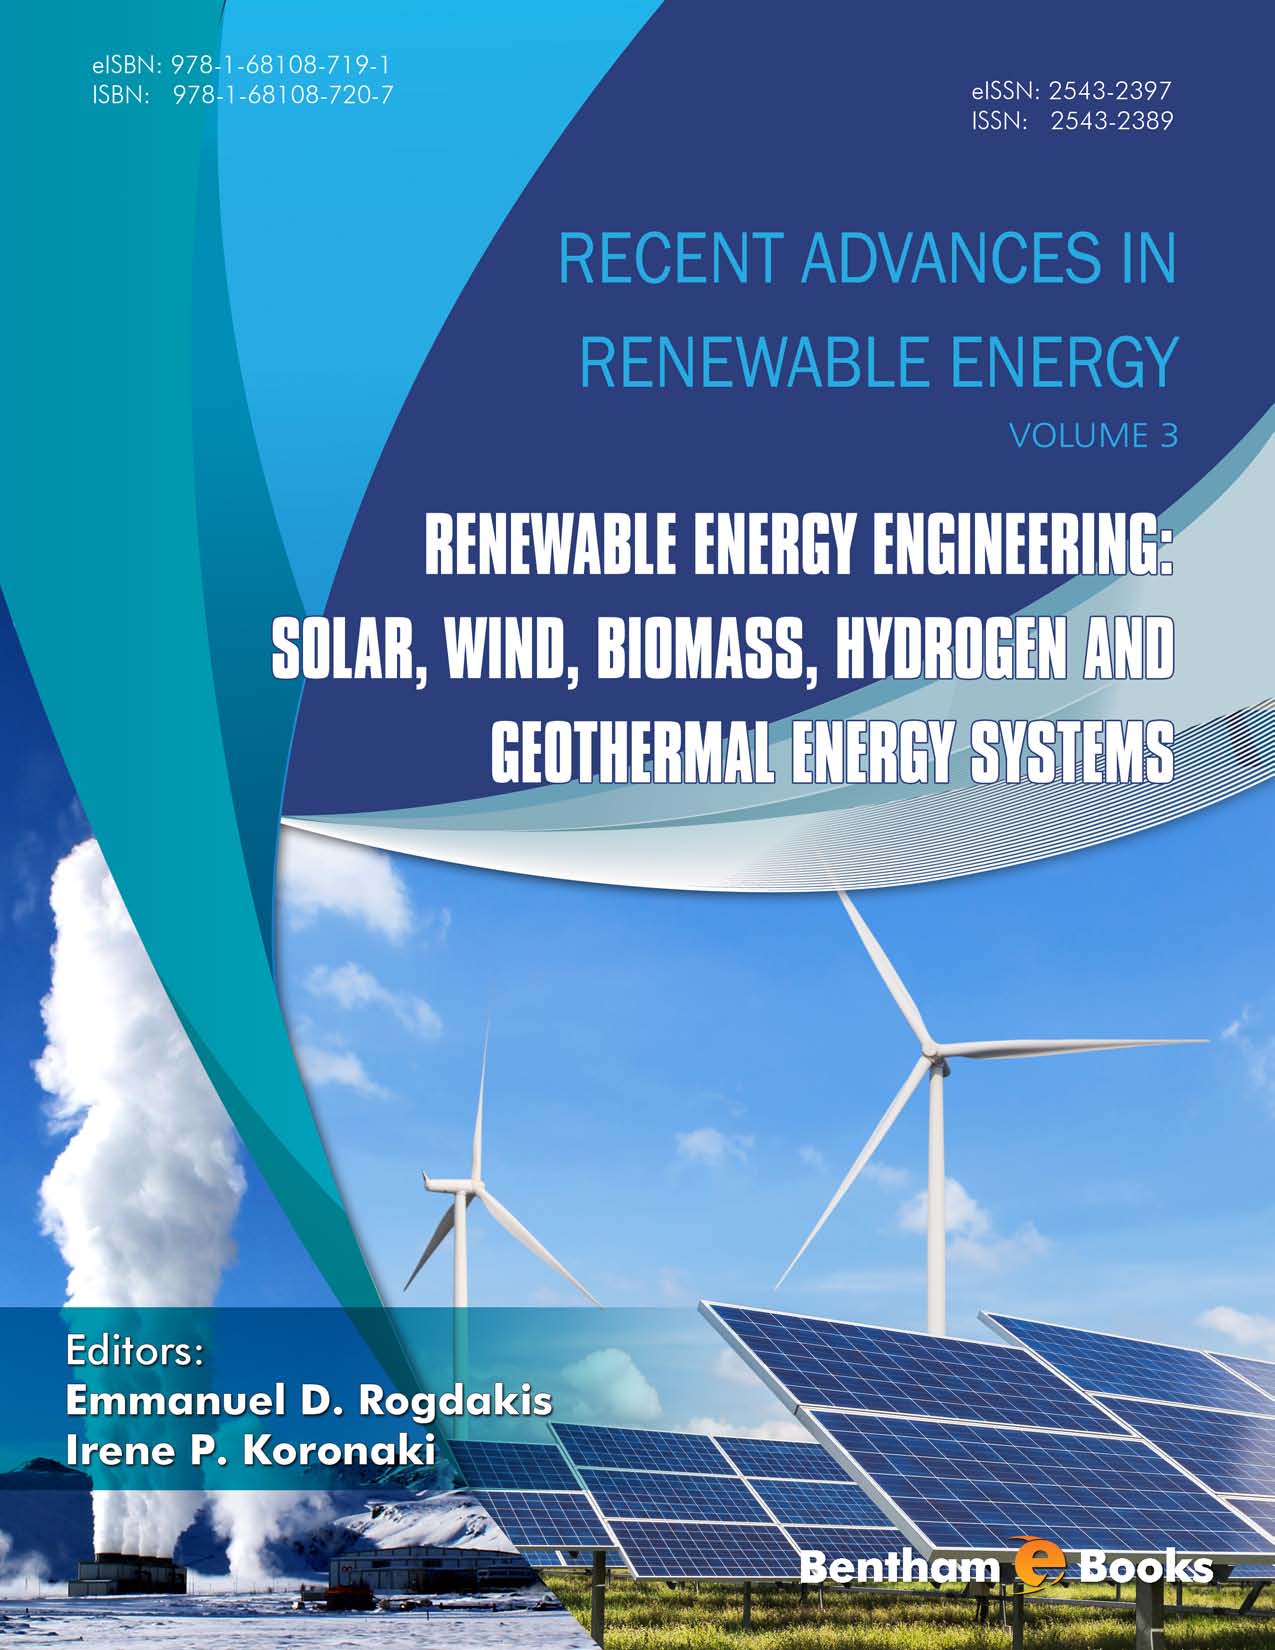 Renewable Energy Engineering: Solar, Wind, Biomass, Hydrogen and Geothermal Energy Systems